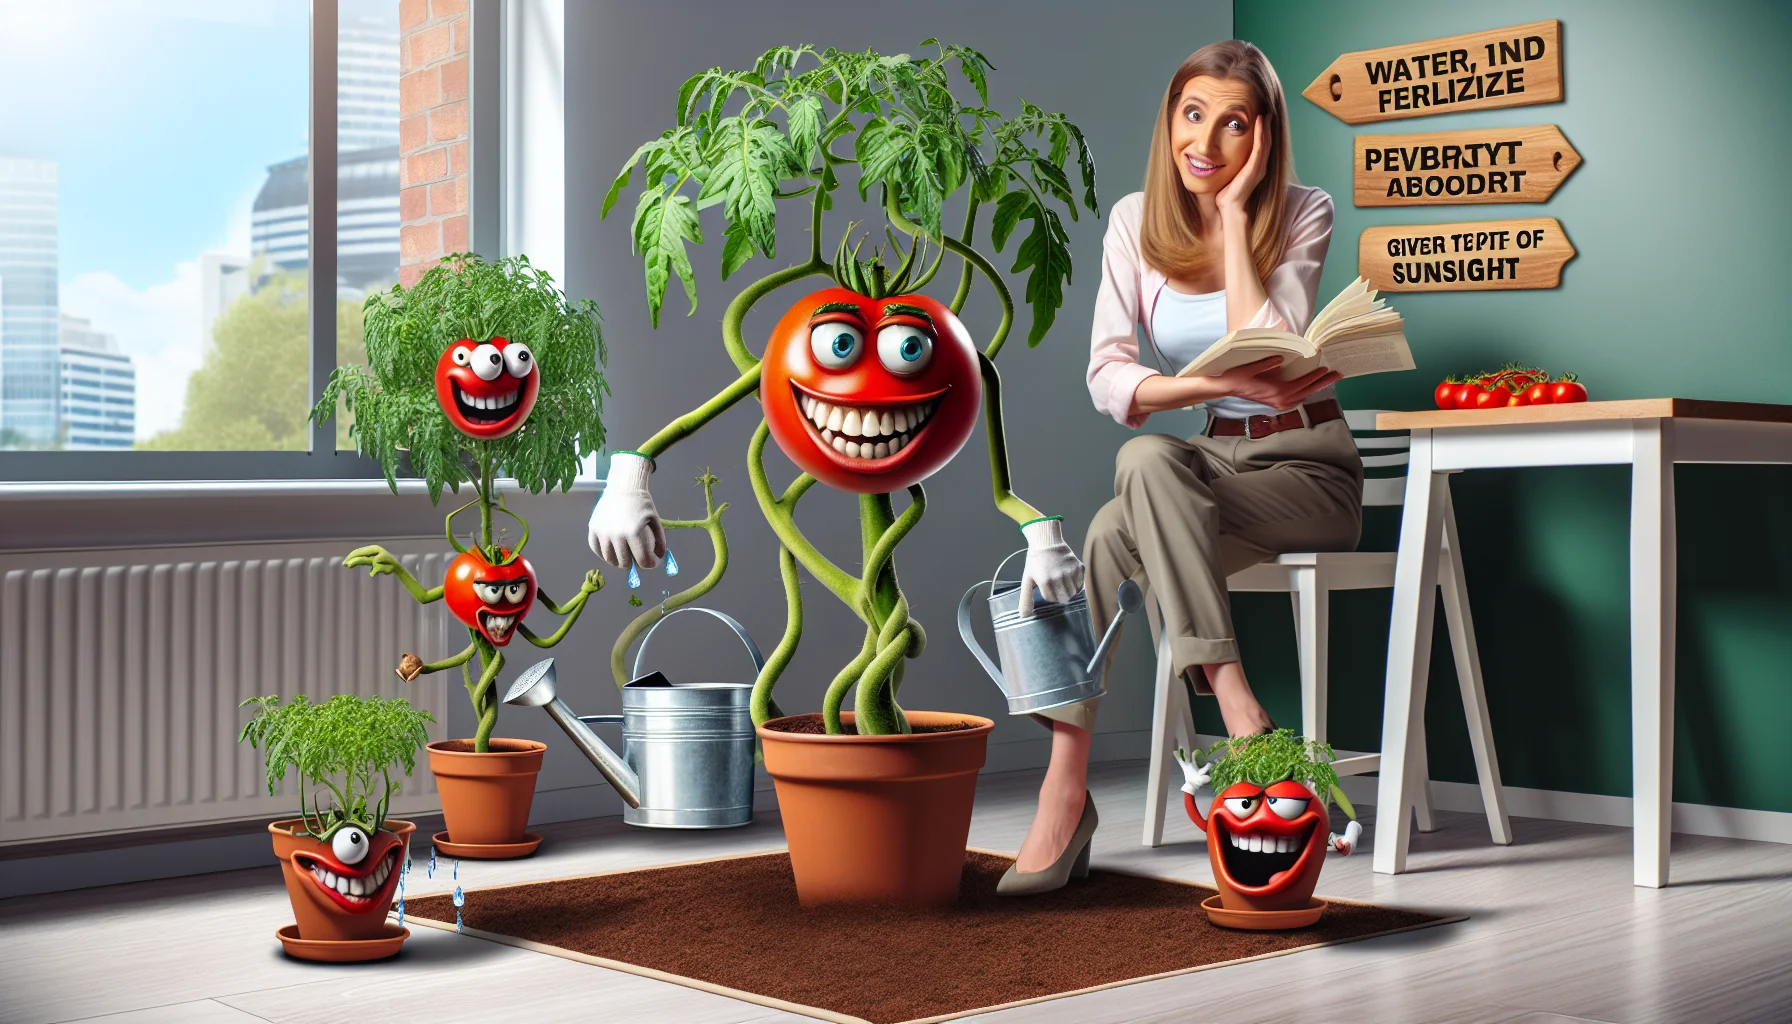 Create an amusing and realistic scene of indoor gardening. A tomato plant with a mischievous grin is twisting its vines playfully around a watering can. Nearby, a couple of enthusiastic gardening tools with expressive faces are also partaking in the fun. A Caucasian woman with a light-hearted expression is shrugging about the unexpected mischief while following a gardening book. Signs around the room playfully remind everyone to water, fertilize, and give plenty of sunlight to the plants, hilariously personifying the process of starting tomatoes indoors.